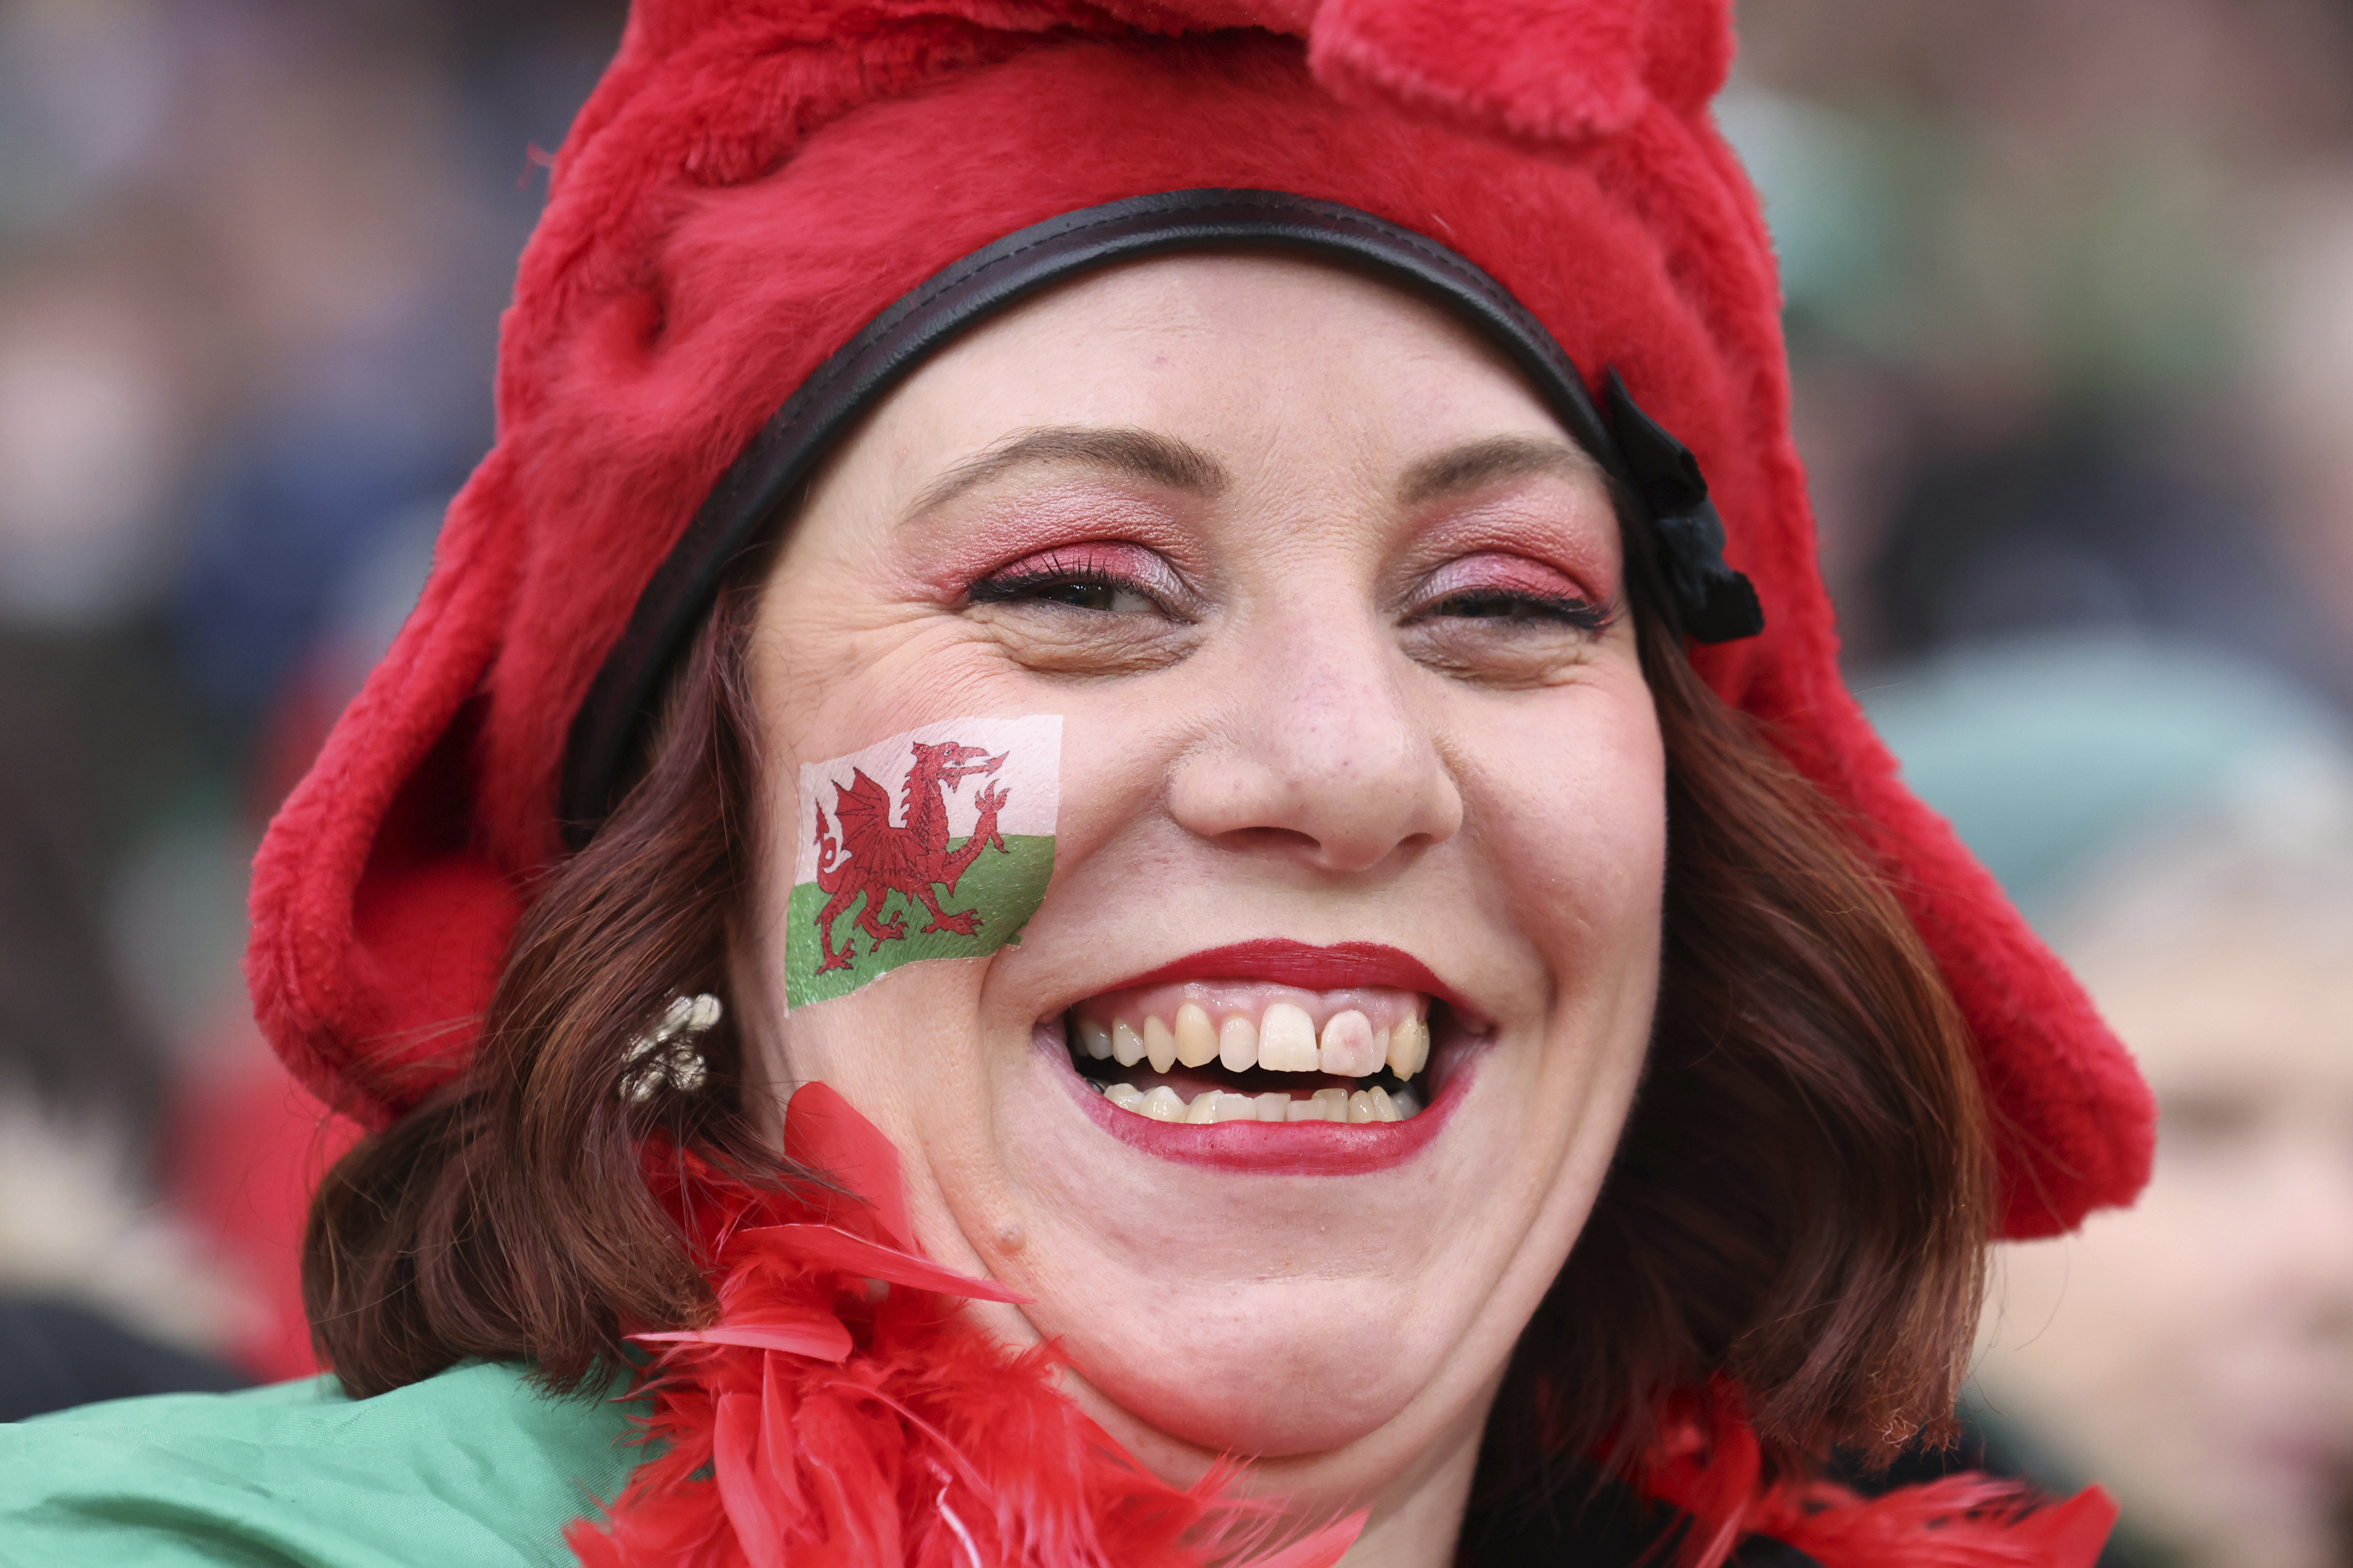 A Wales fan smiles as she waits for the start of the Six Nations rugby union match between Ireland and Wales at the Aviva stadium in Dublin, Ireland, Saturday, Feb. 5, 2022. (AP Photo/Peter Morrison)